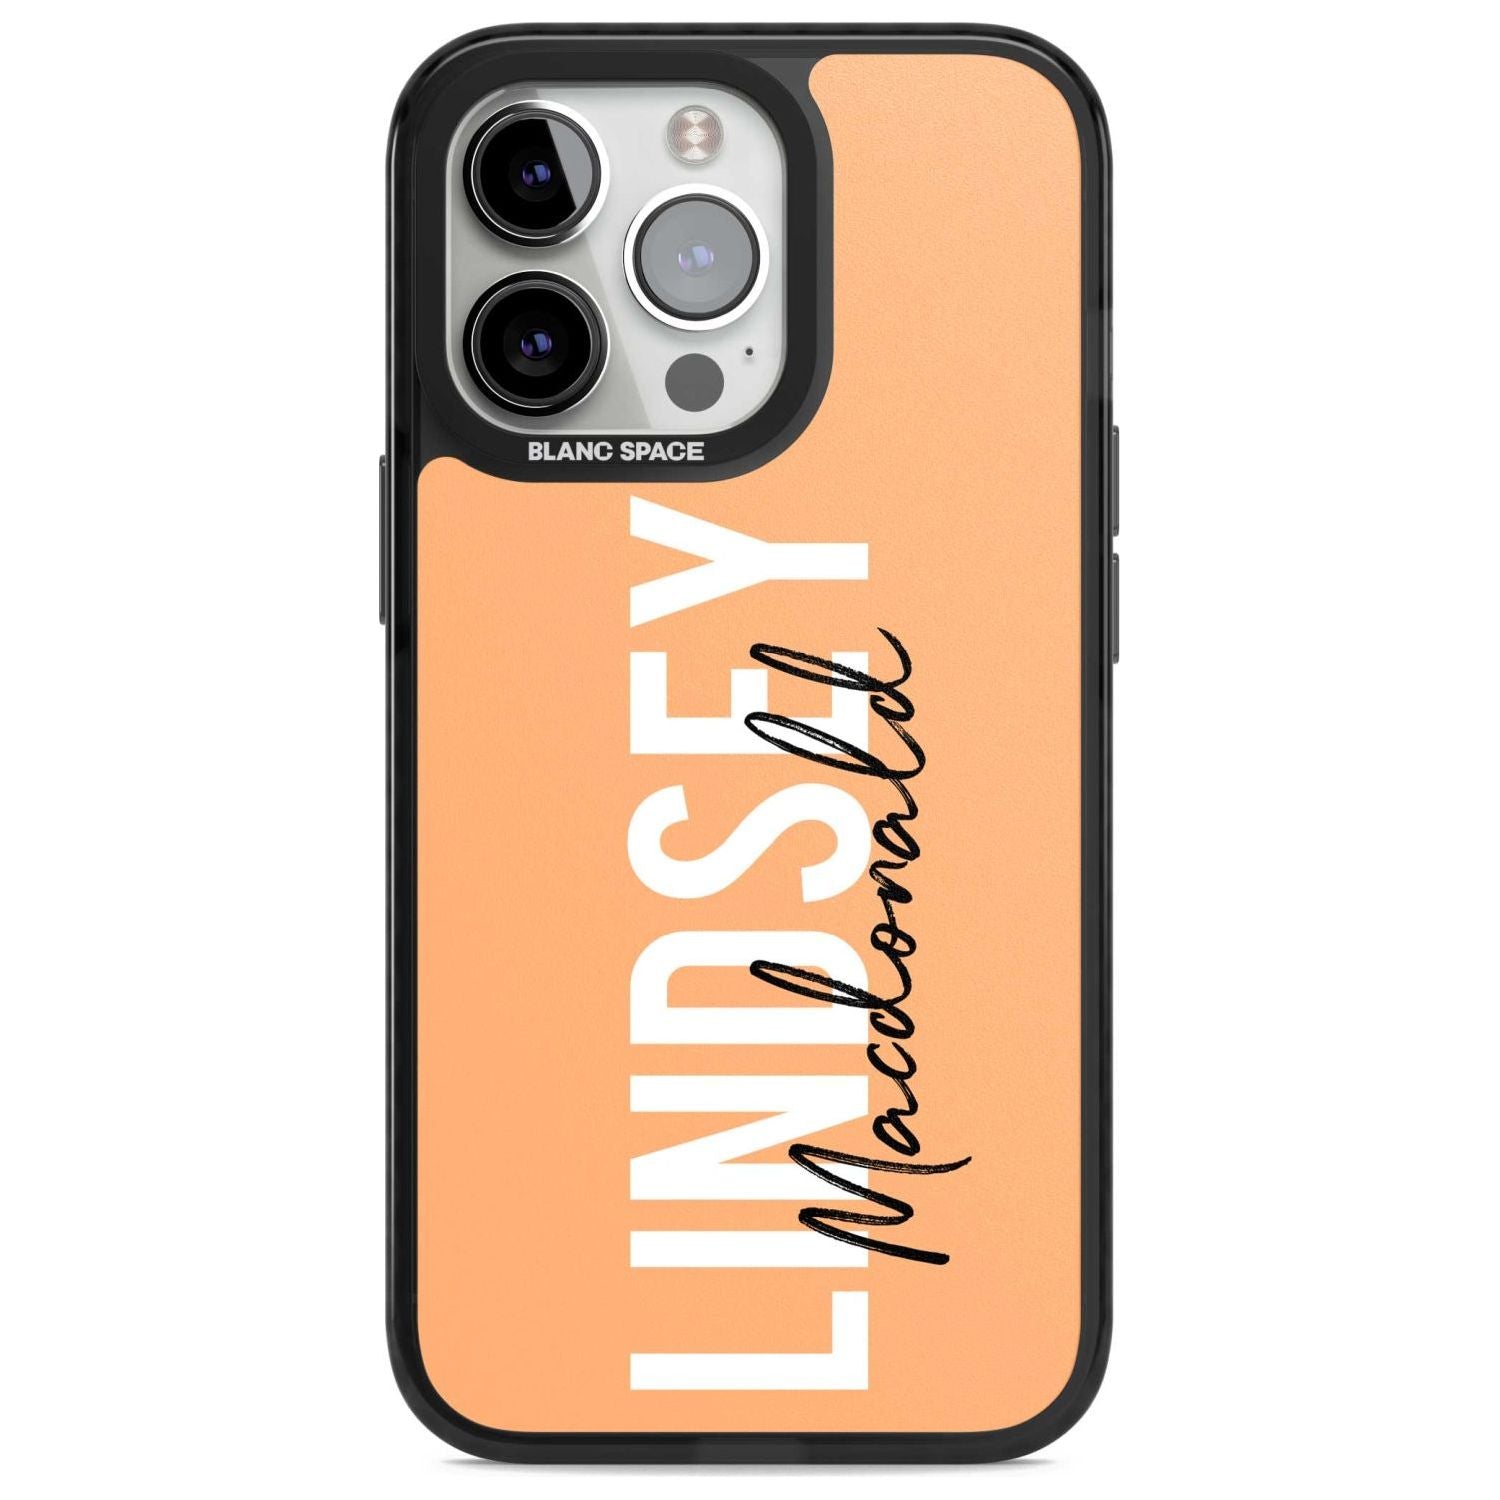 Personalised Bold Name: Peach Custom Phone Case iPhone 15 Pro Max / Magsafe Black Impact Case,iPhone 15 Pro / Magsafe Black Impact Case,iPhone 14 Pro Max / Magsafe Black Impact Case,iPhone 14 Pro / Magsafe Black Impact Case,iPhone 13 Pro / Magsafe Black Impact Case Blanc Space